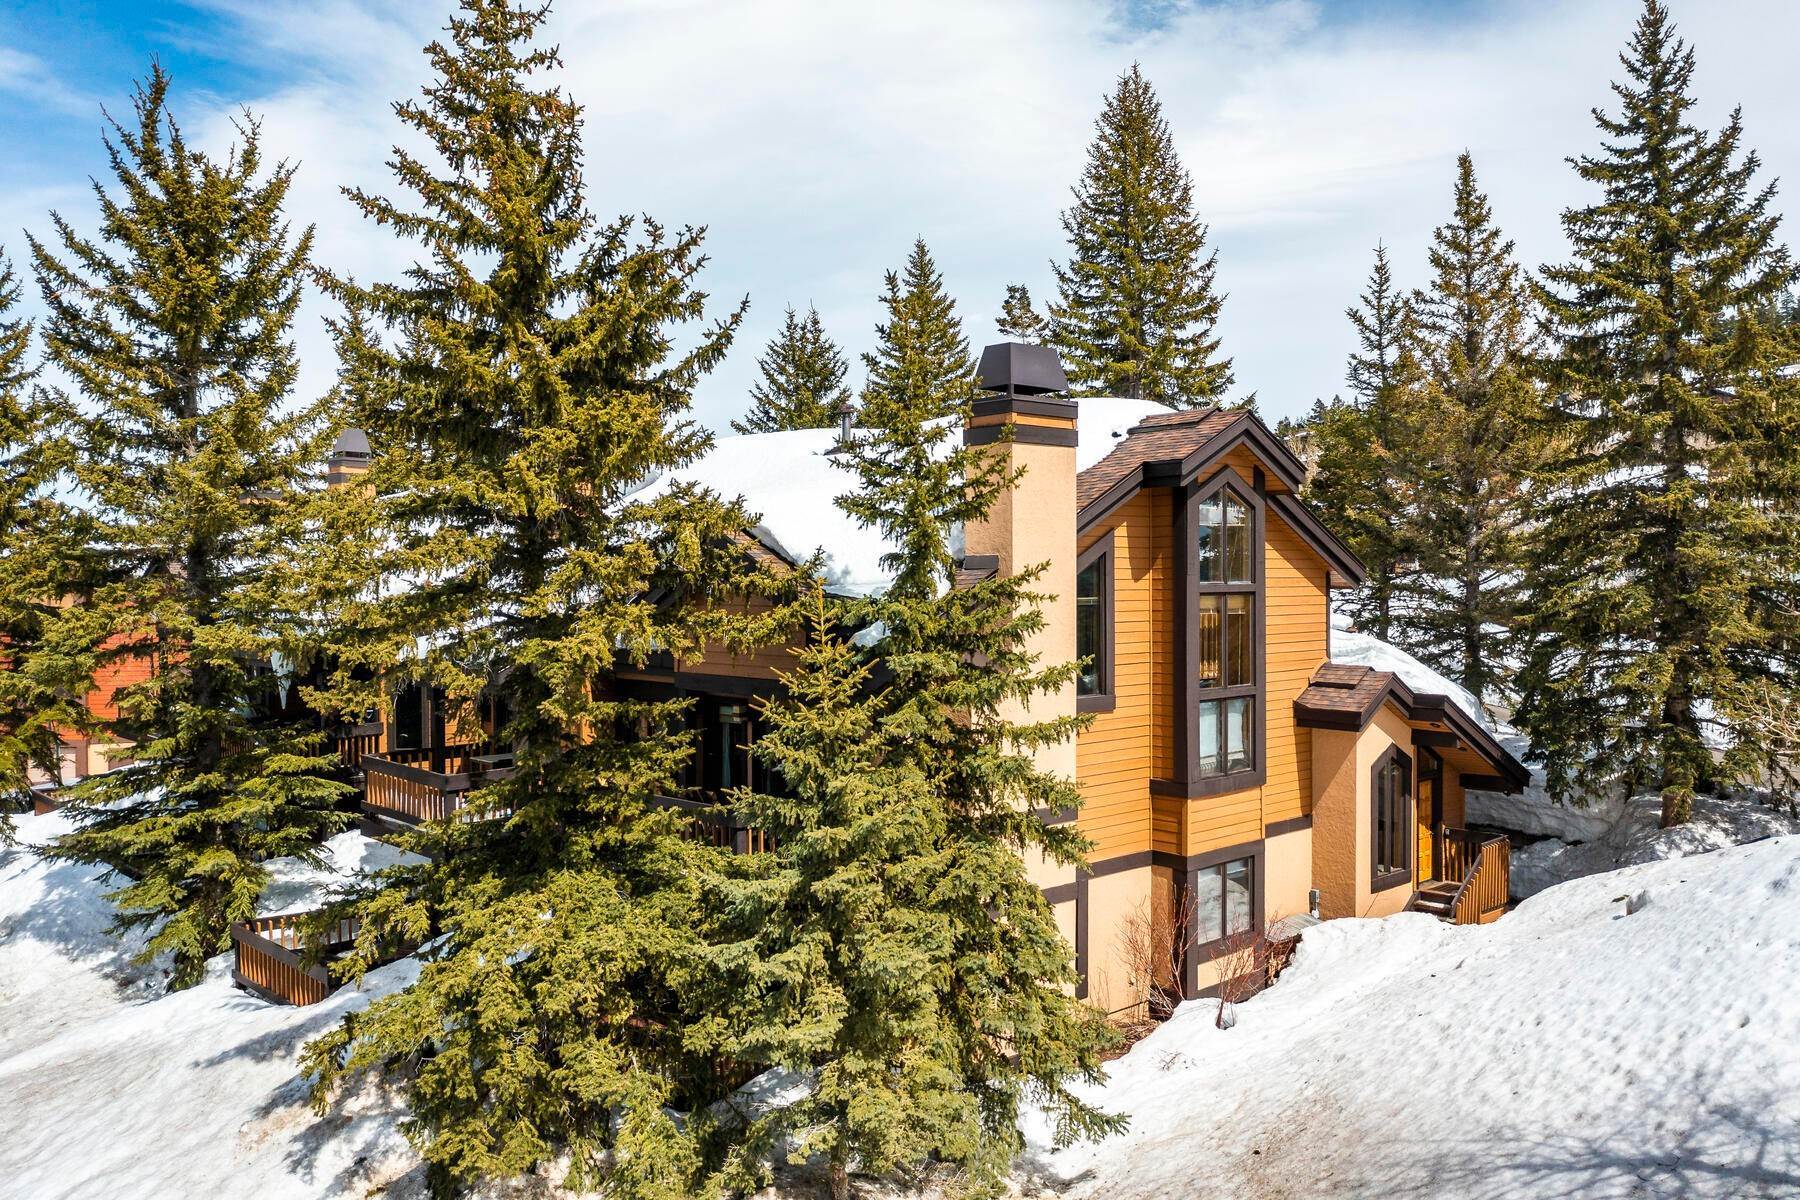 Property for Sale at Deer Valley Townhome With Mountain Views and Ski Access! 7981 Ridgepoint Drive #105 Park City, Utah 84060 United States